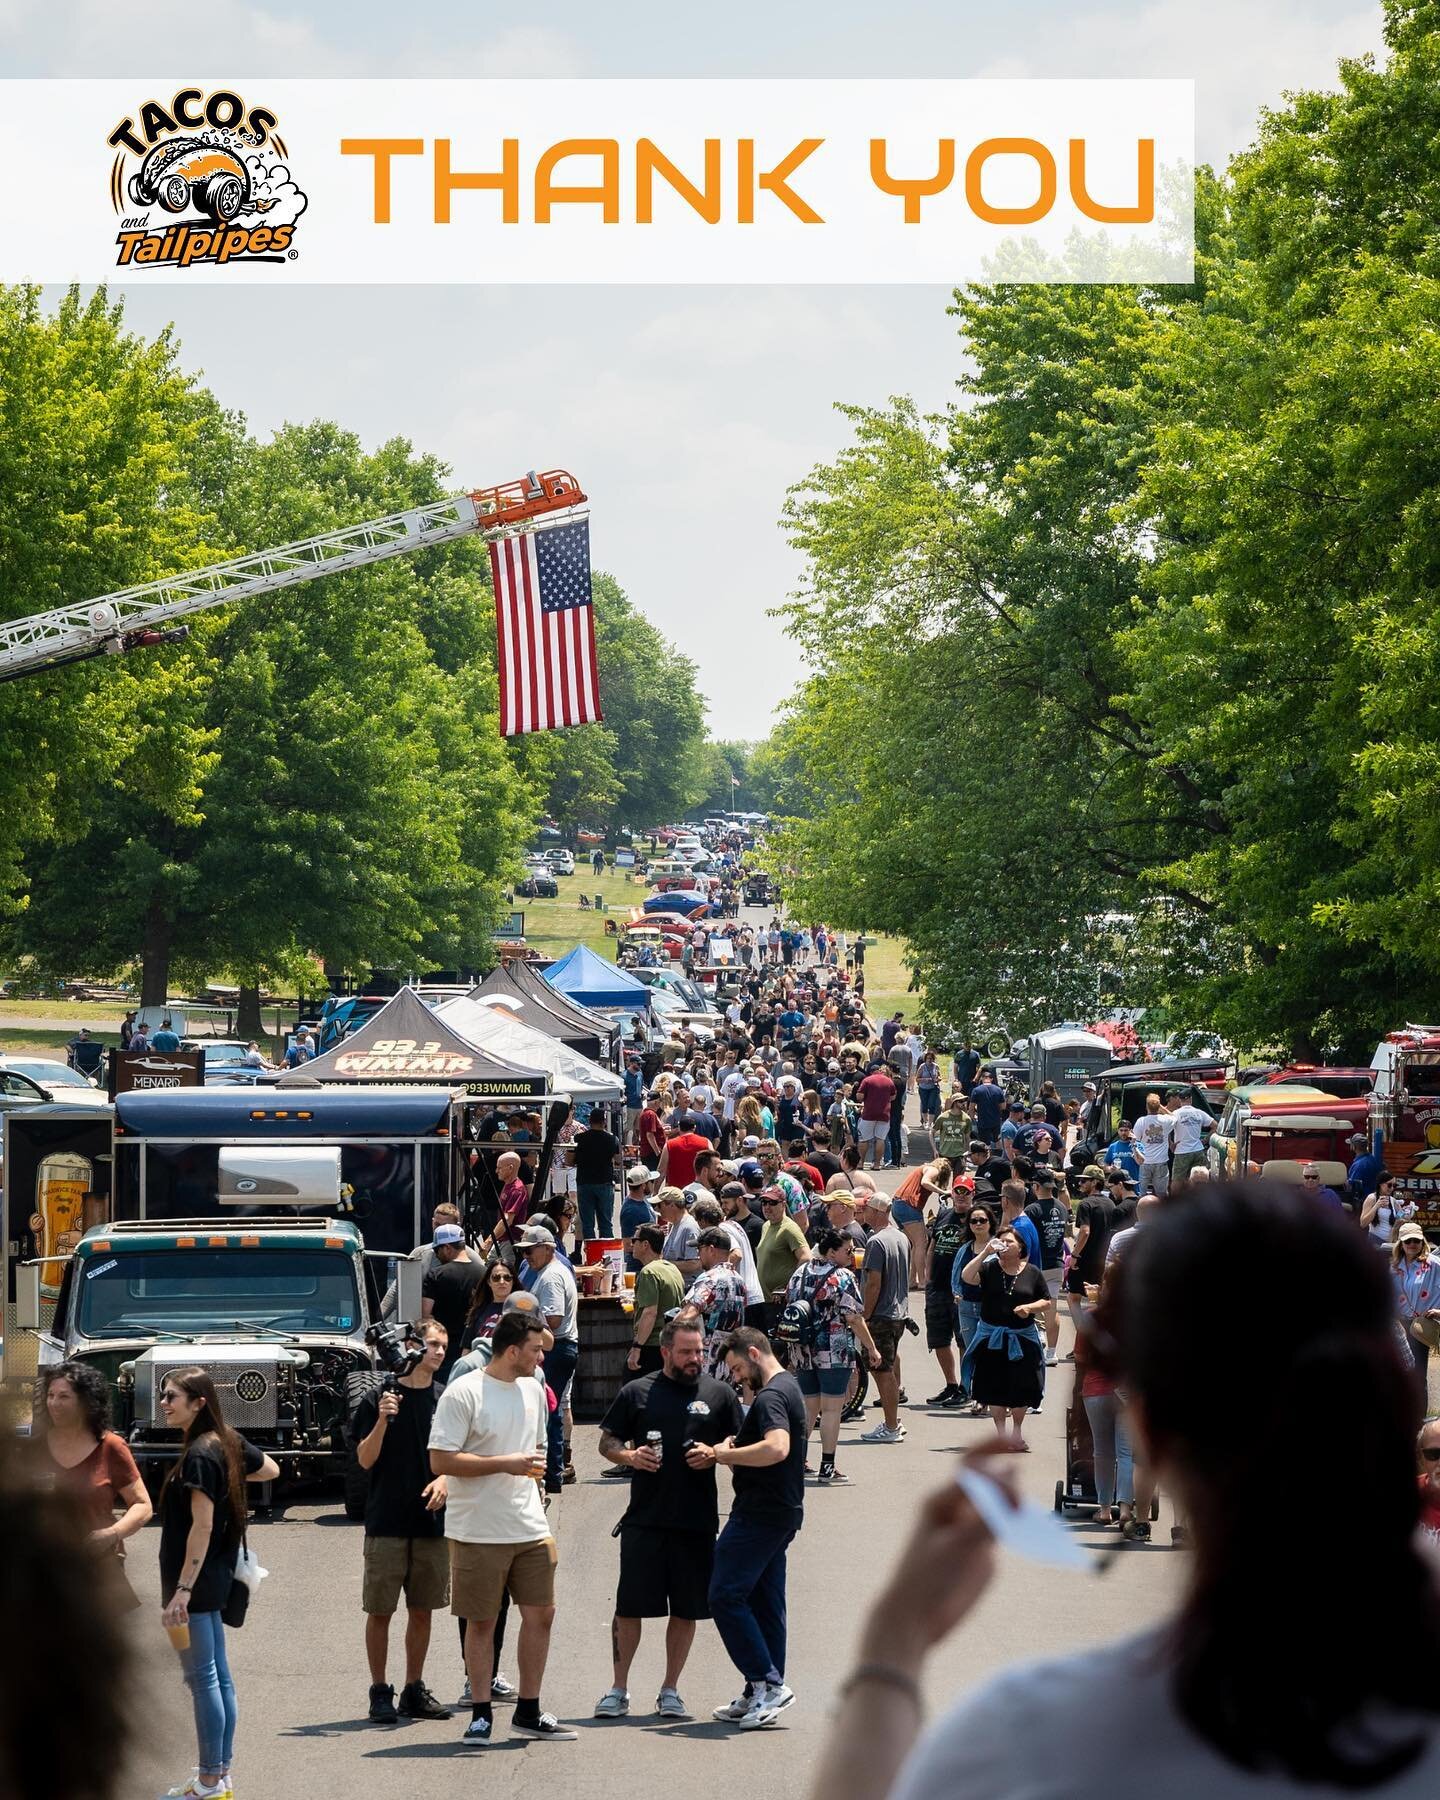 THANK YOU 🧡🌮💨to everyone for the most epic Tacos and Tailpipes to date. The outcome blew our expectations out of the water. Allegedly we had somewhere between 8-10k people come out🤯 
.
We just passed $40k in donations and counting for Michael Abb